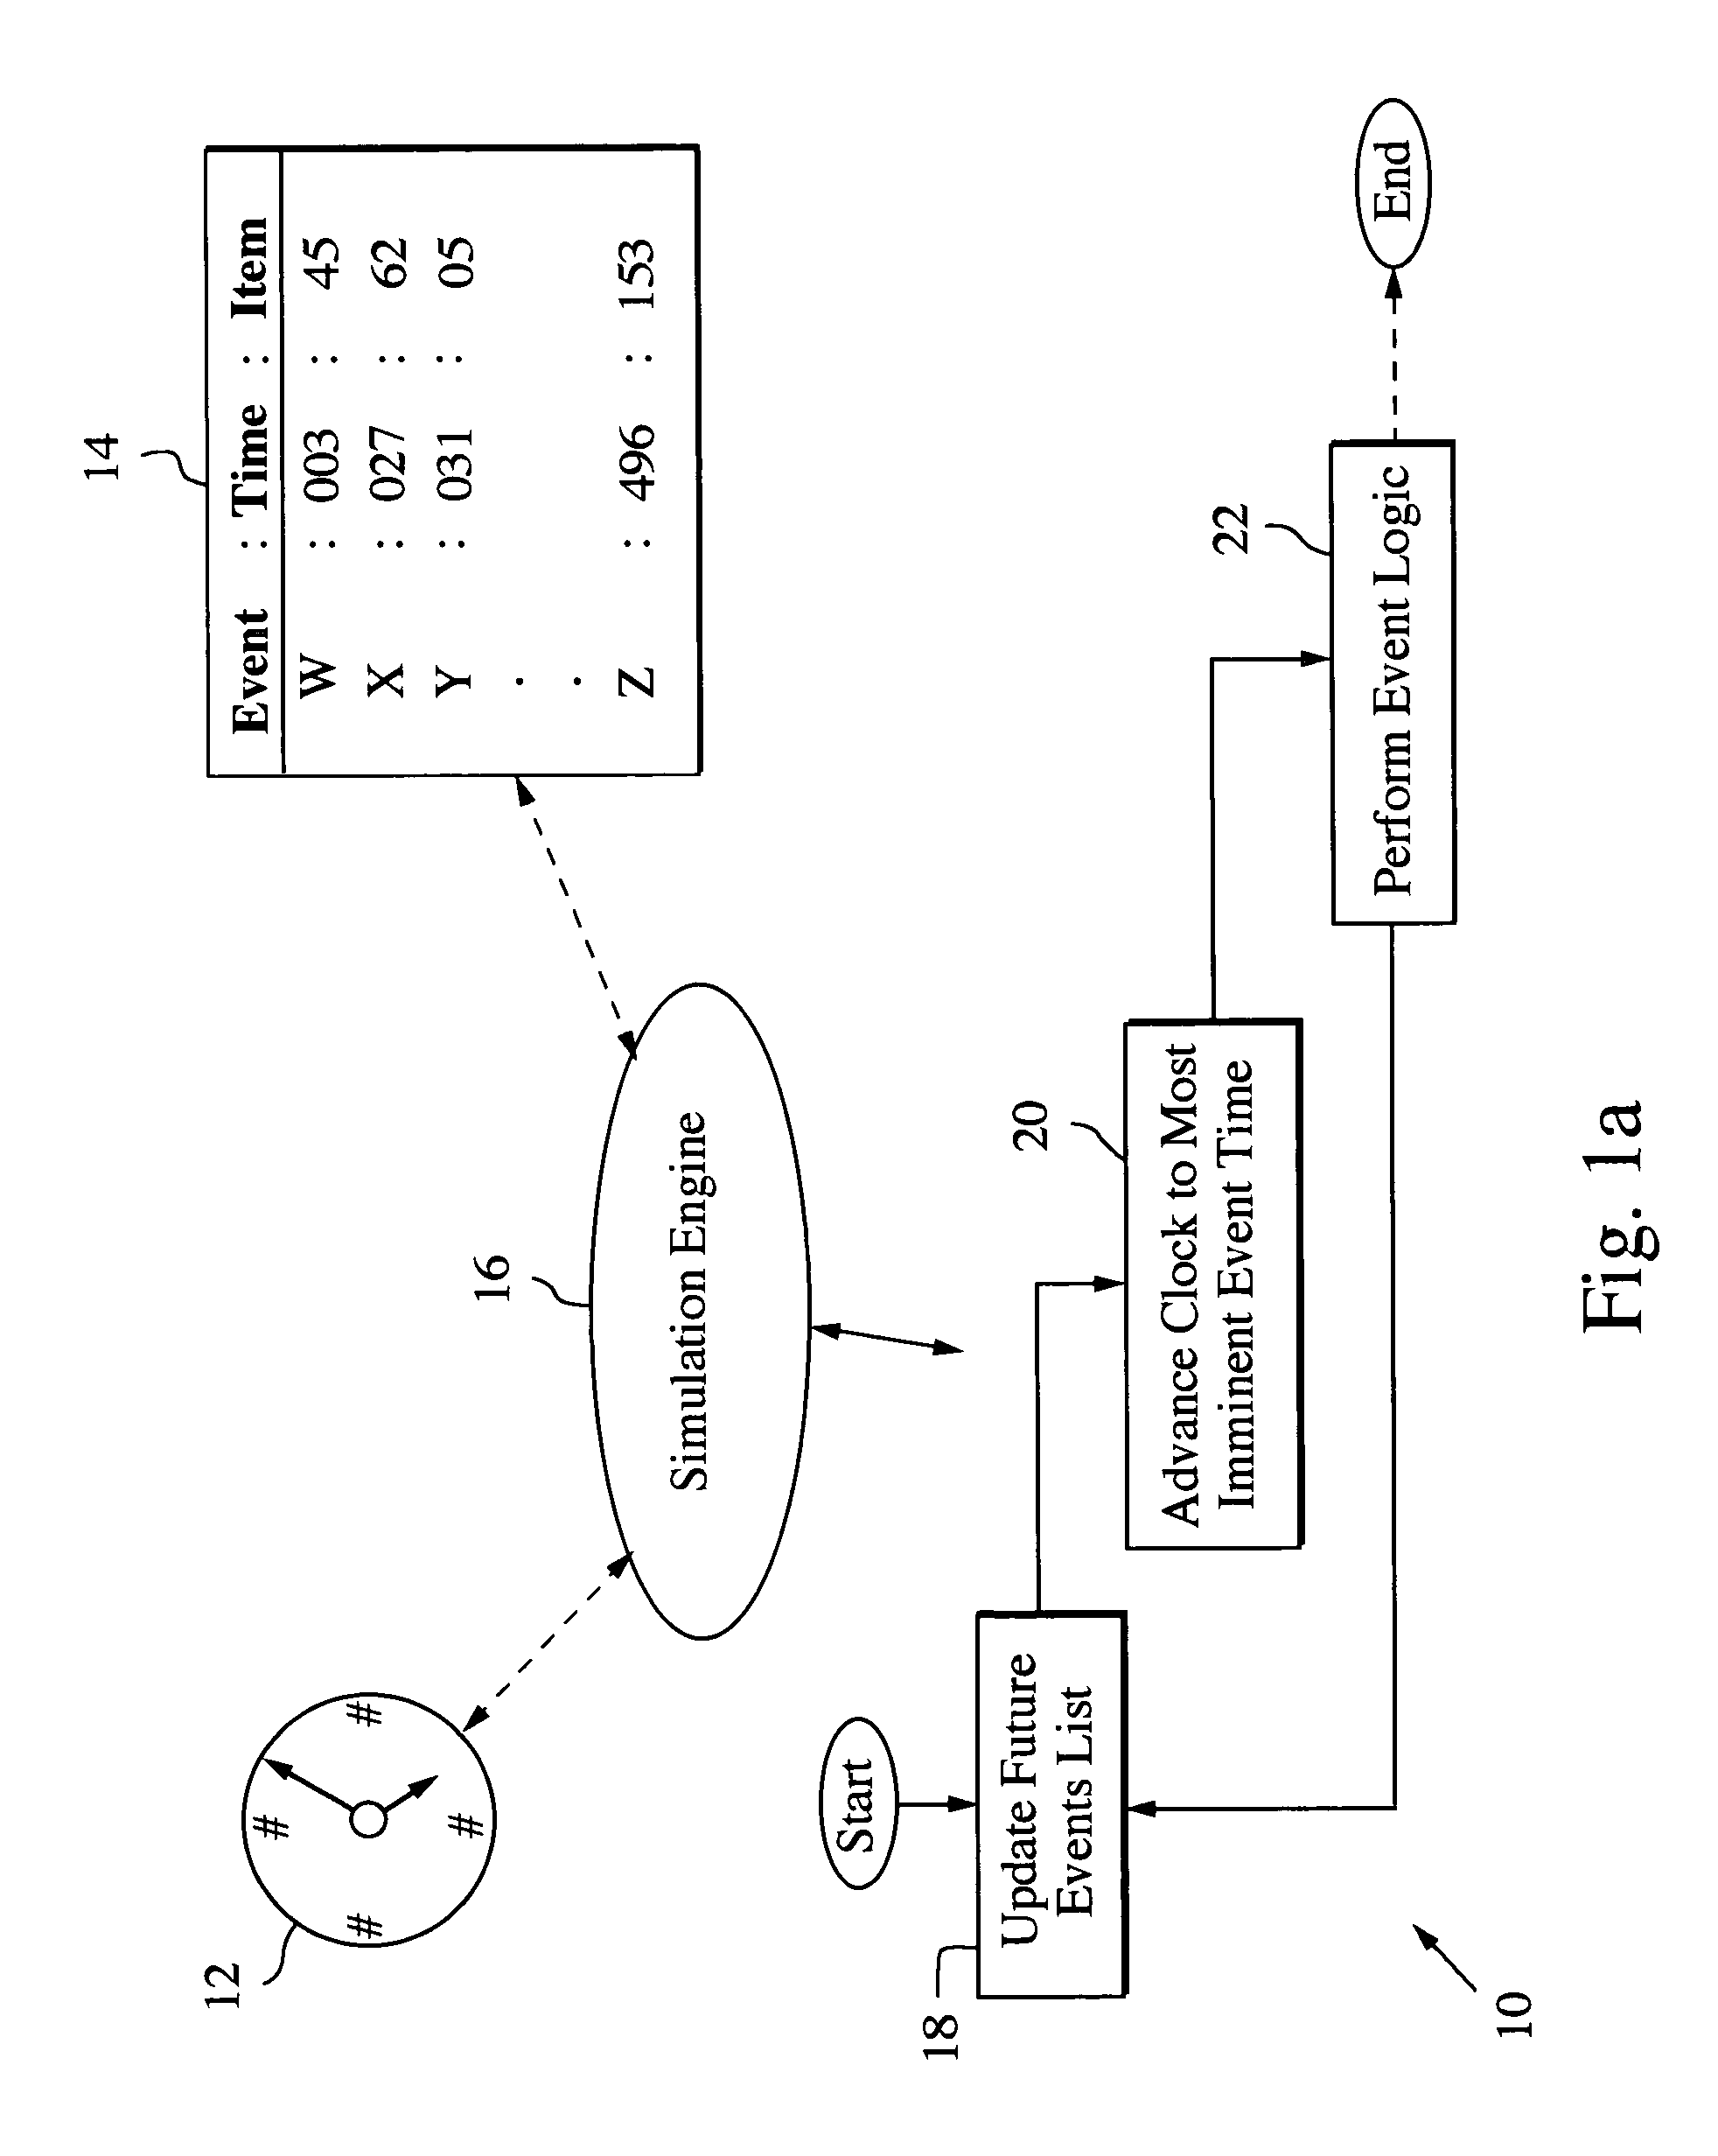 Operations and support discrete event stimulation system and method